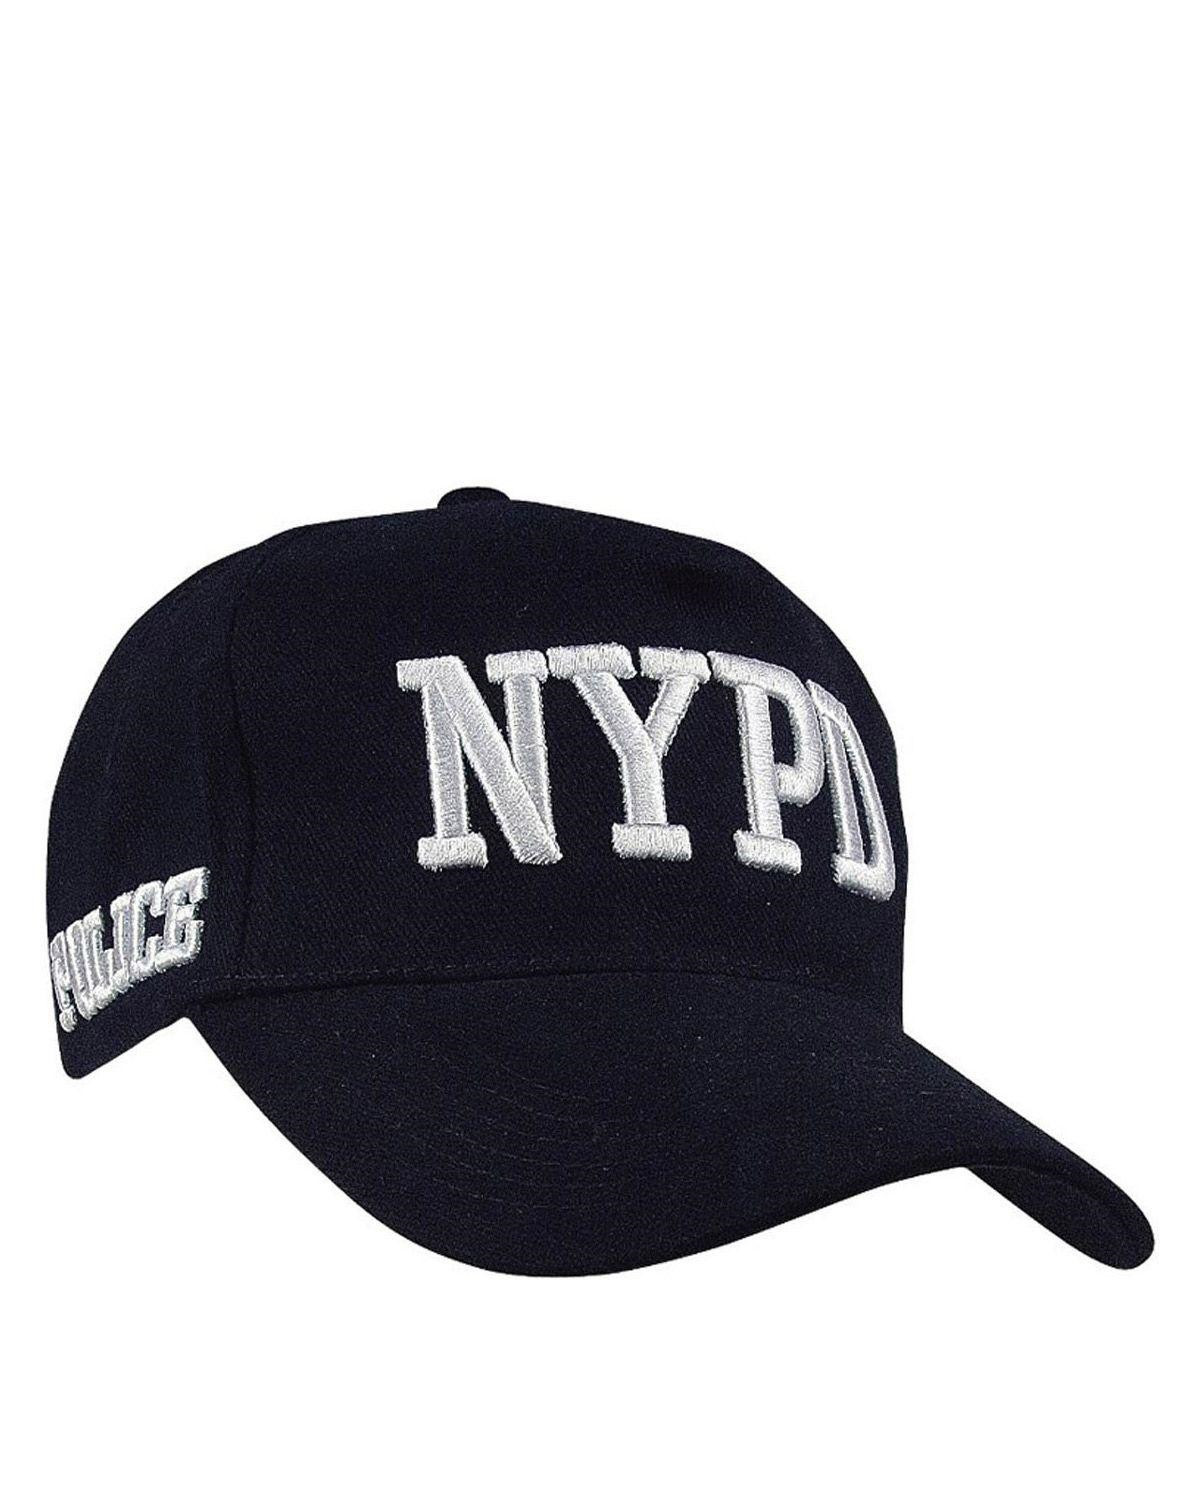 Rothco NYPD Cap (Navy m. NYPD, One Size)